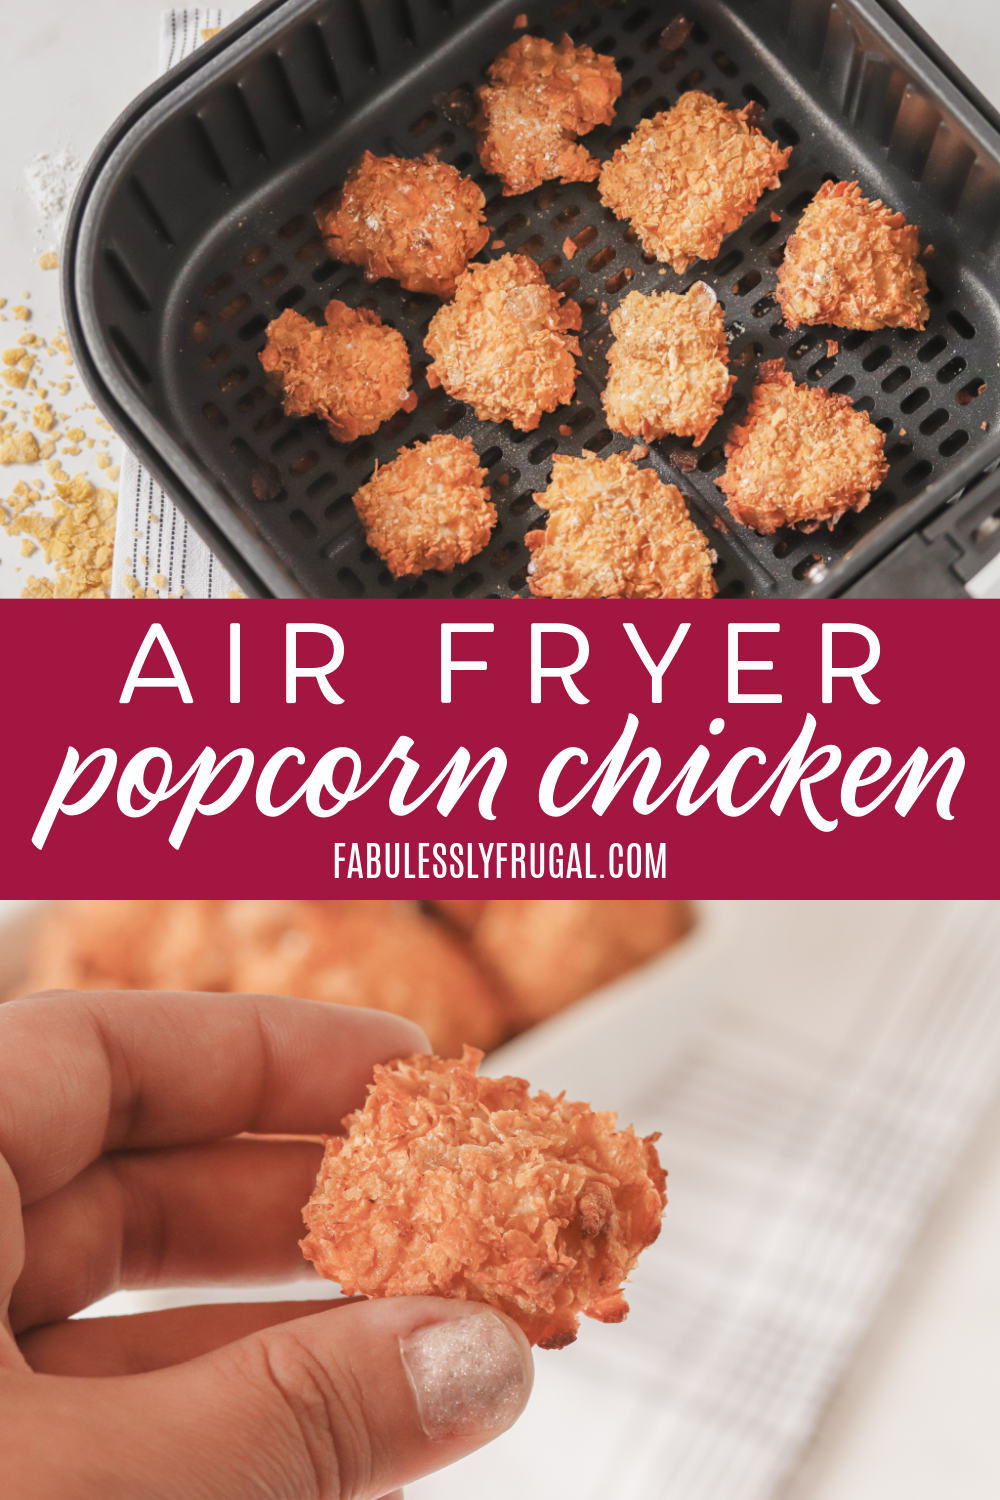 Popcorn chicken in the air fryer?! Yes, please! Quick, healthy, and tasty air fryer popcorn chicken will be your new family favorite meal!